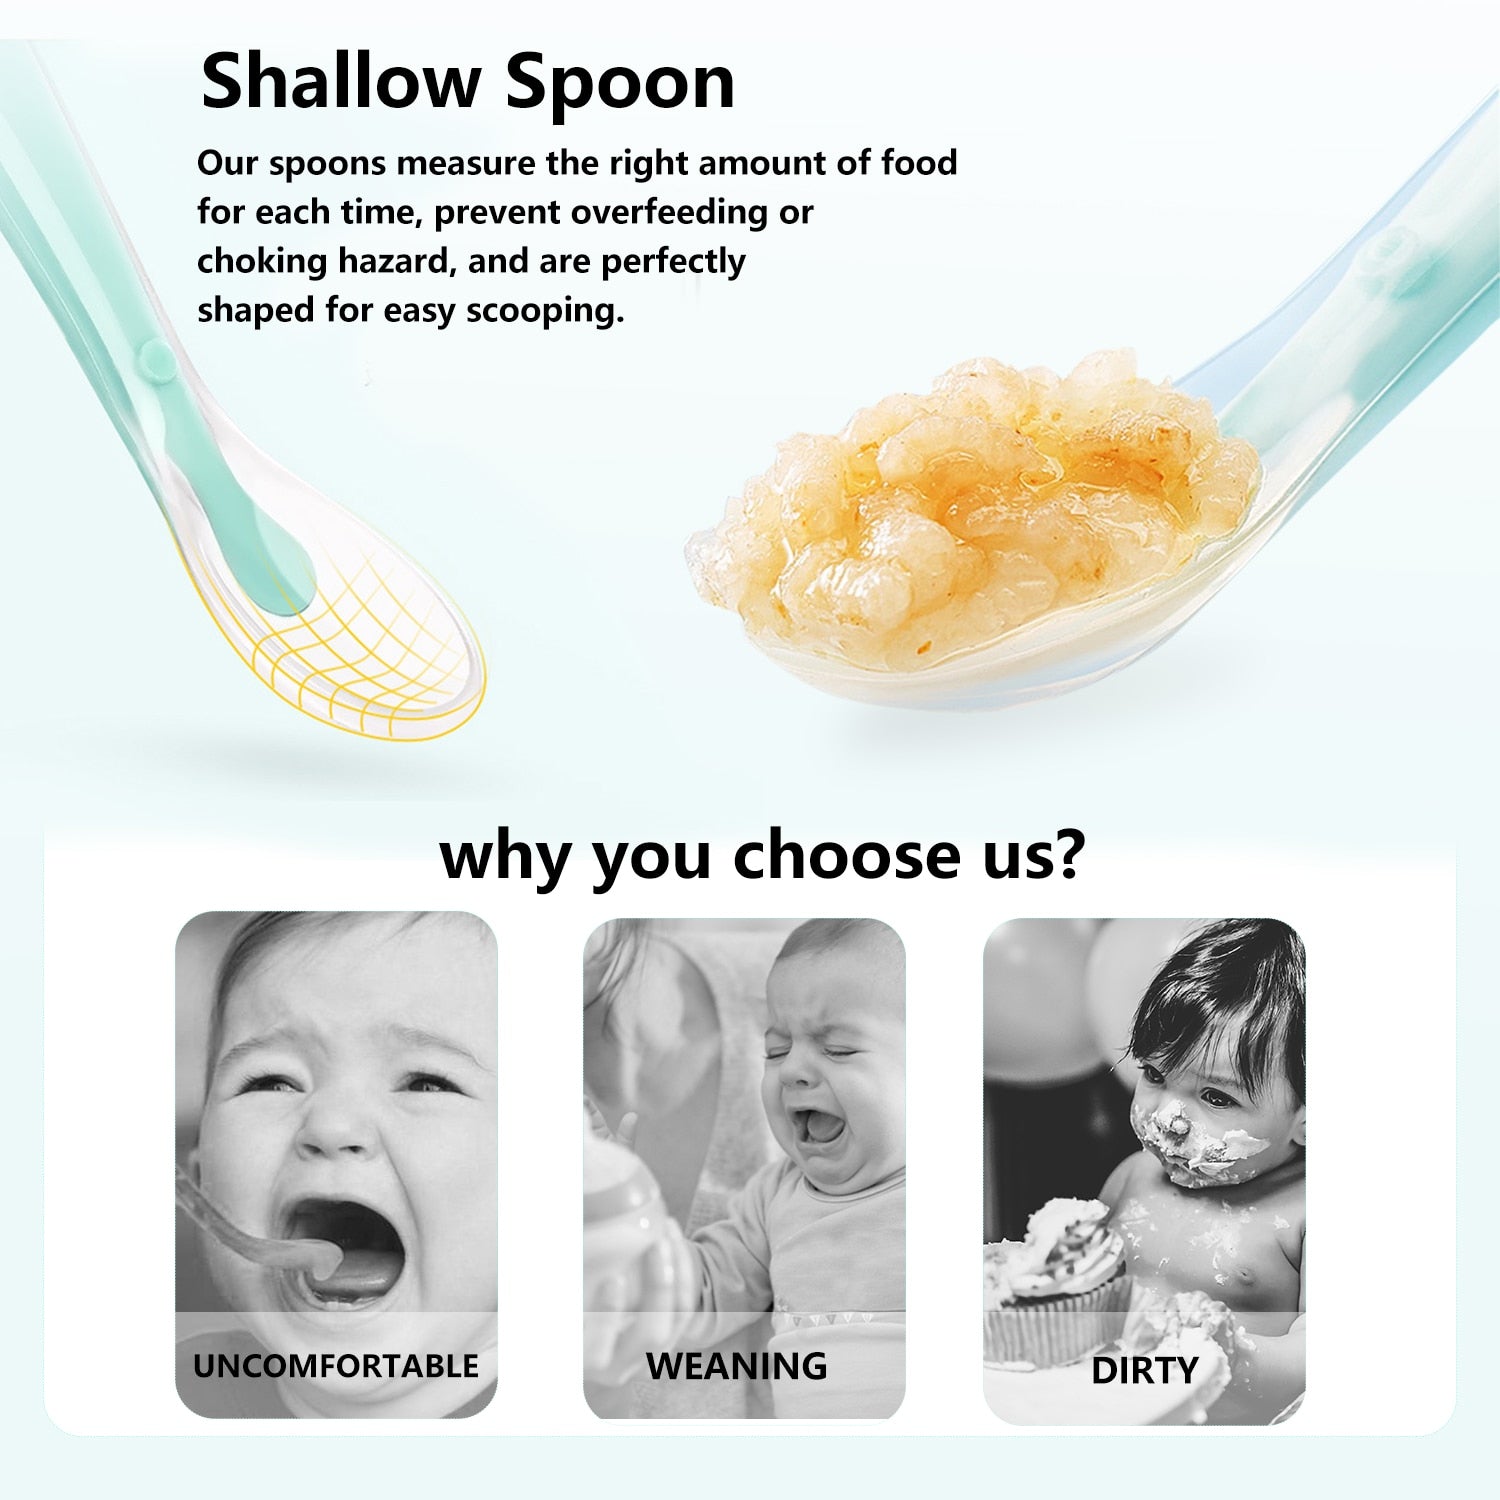 Soft Silicone Baby Feeding Spoon Candy Color Temperature Sensing Spoon Children Food Baby Spoons Feeding Dishes Feeder Flatware